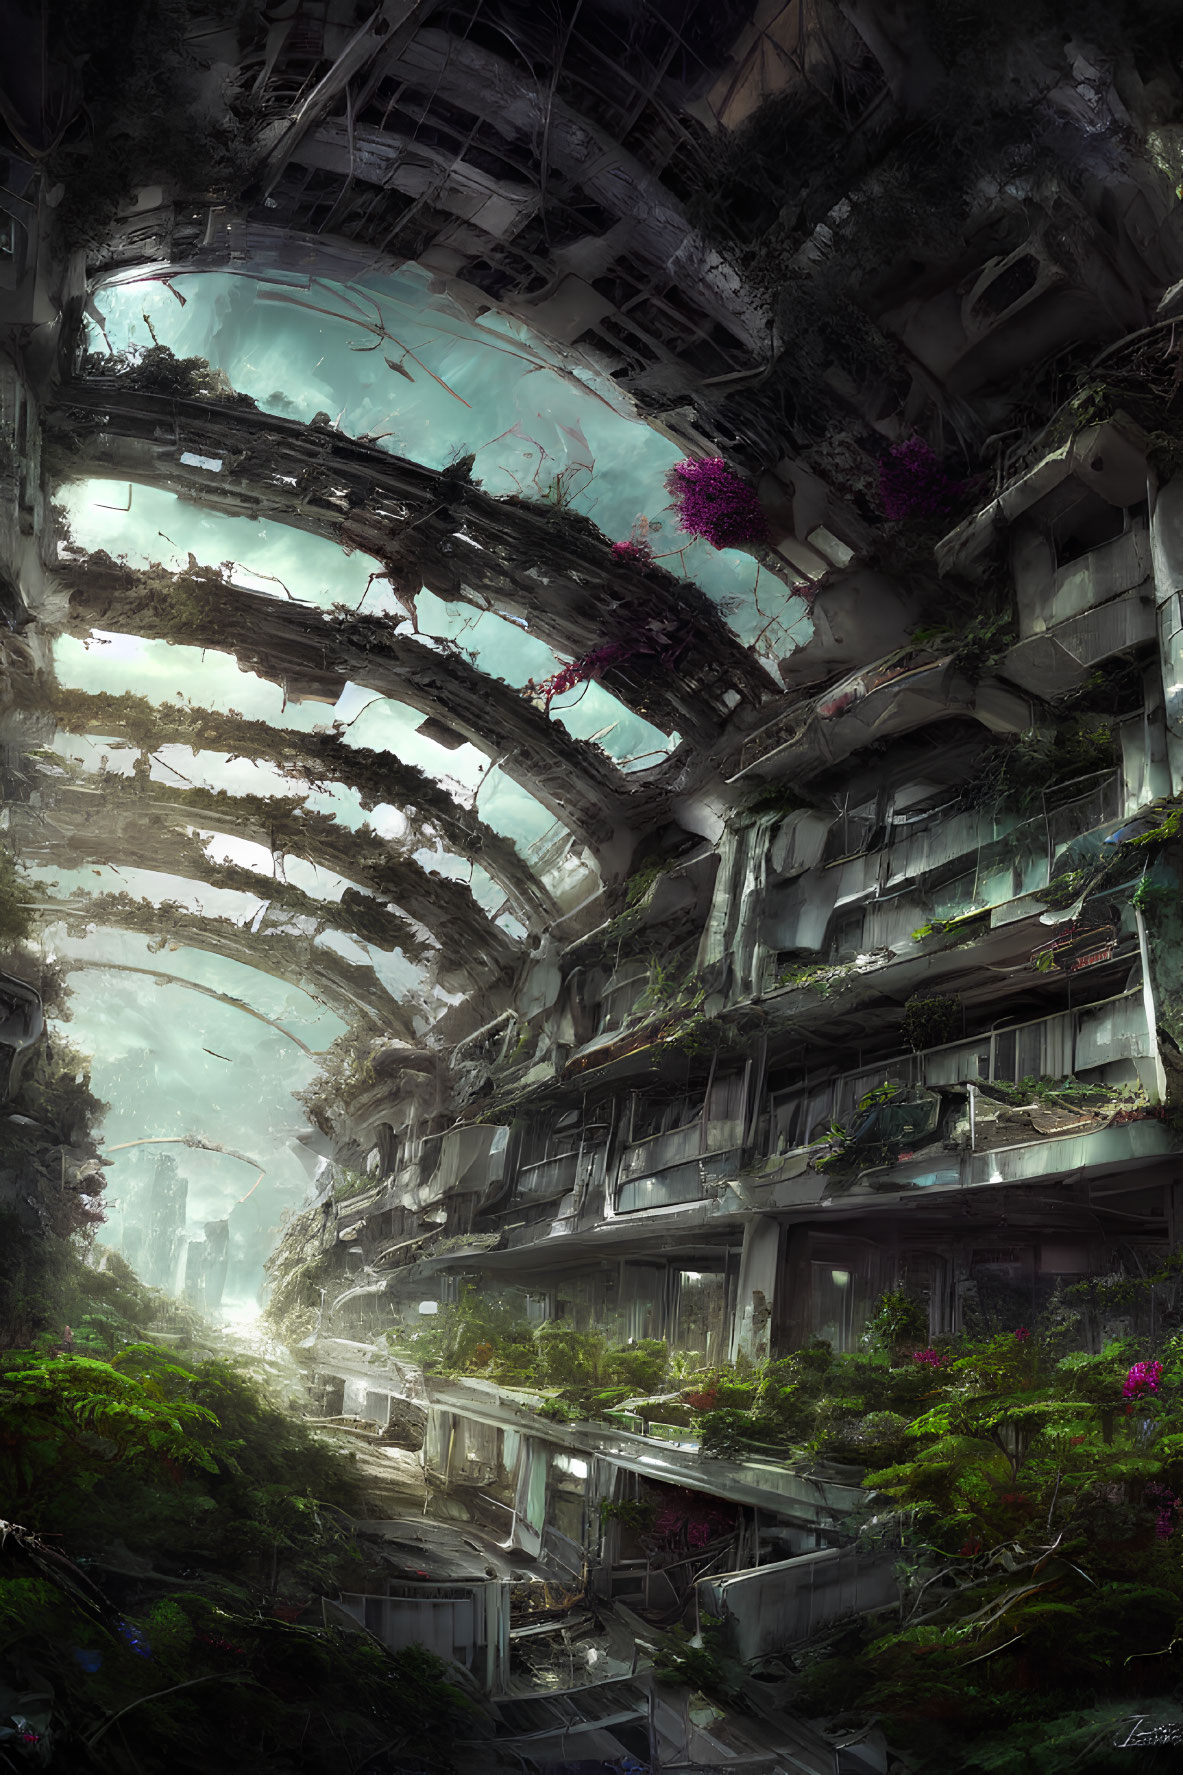 Abandoned cylindrical structure with overgrown plants and cityscape backdrop